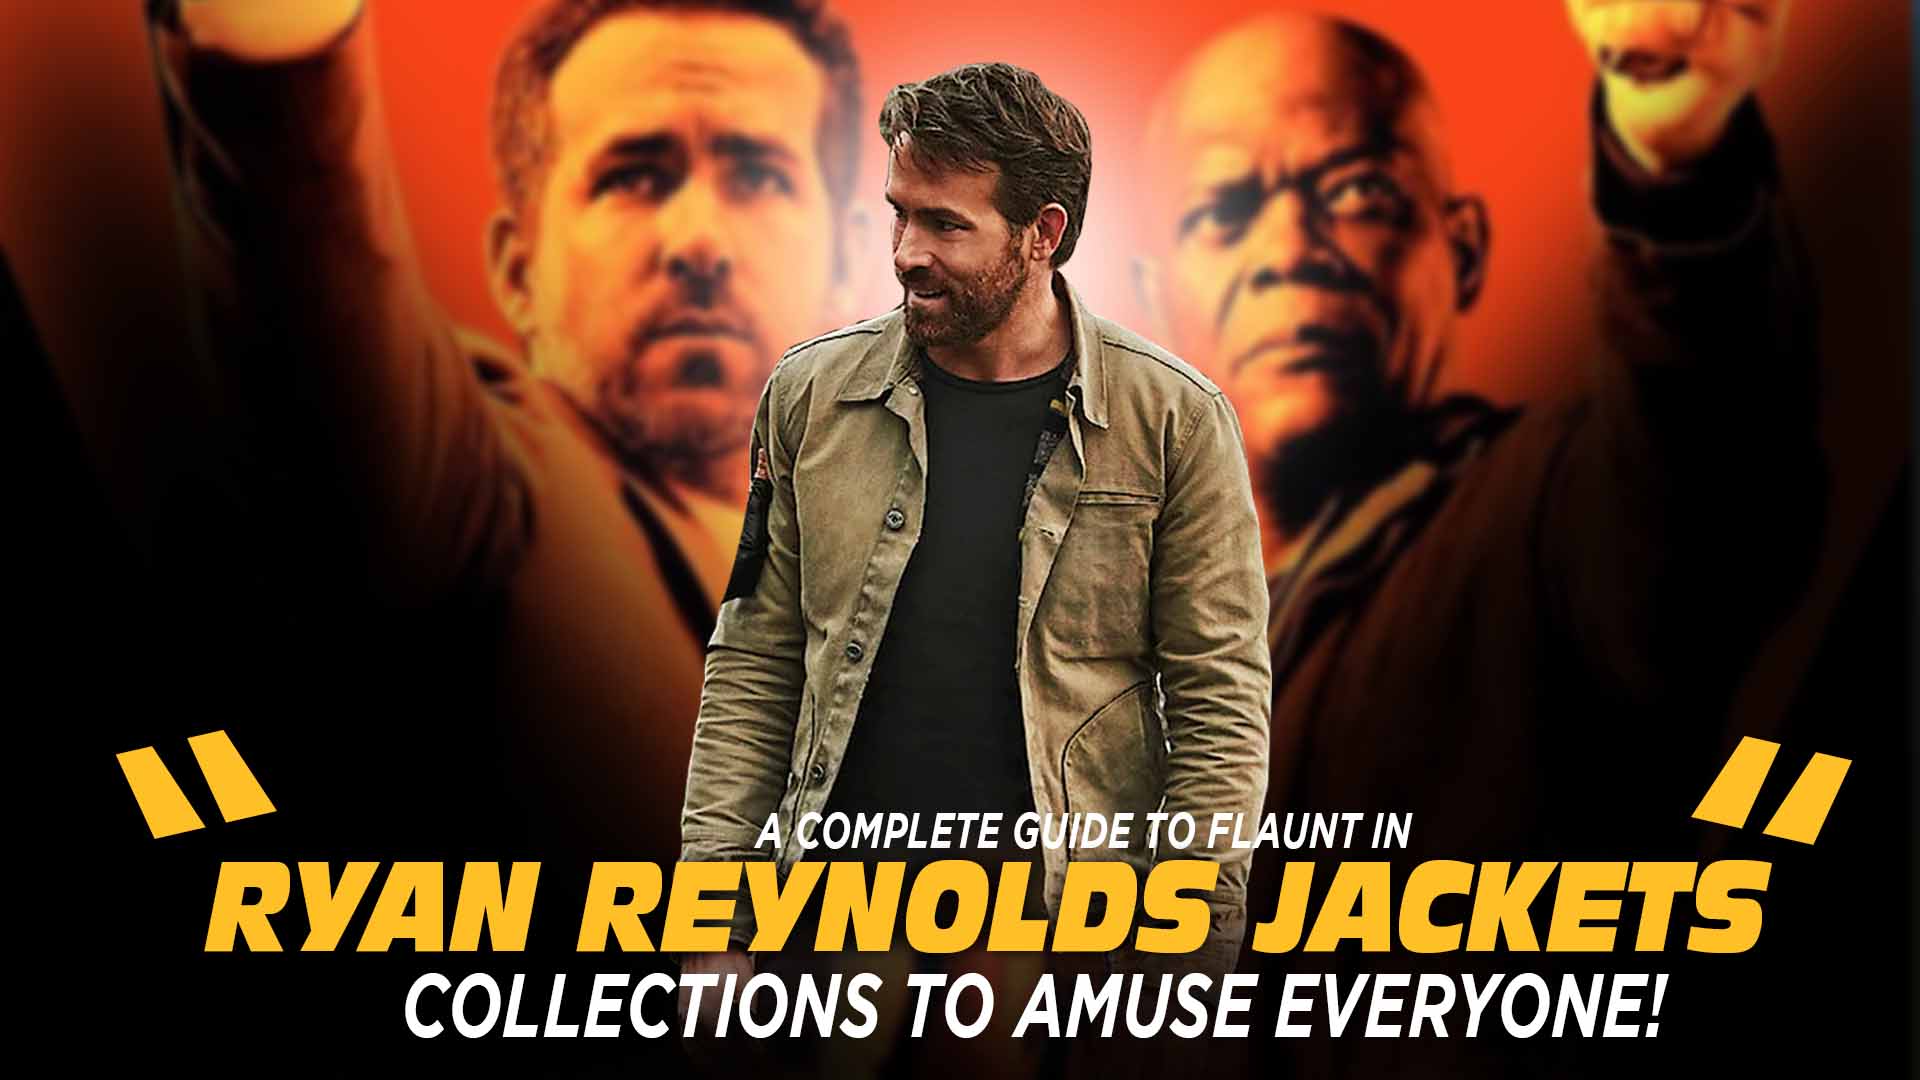 A Complete Guide to Flaunt in Ryan Reynolds Jackets Collections to Amuse Everyone!